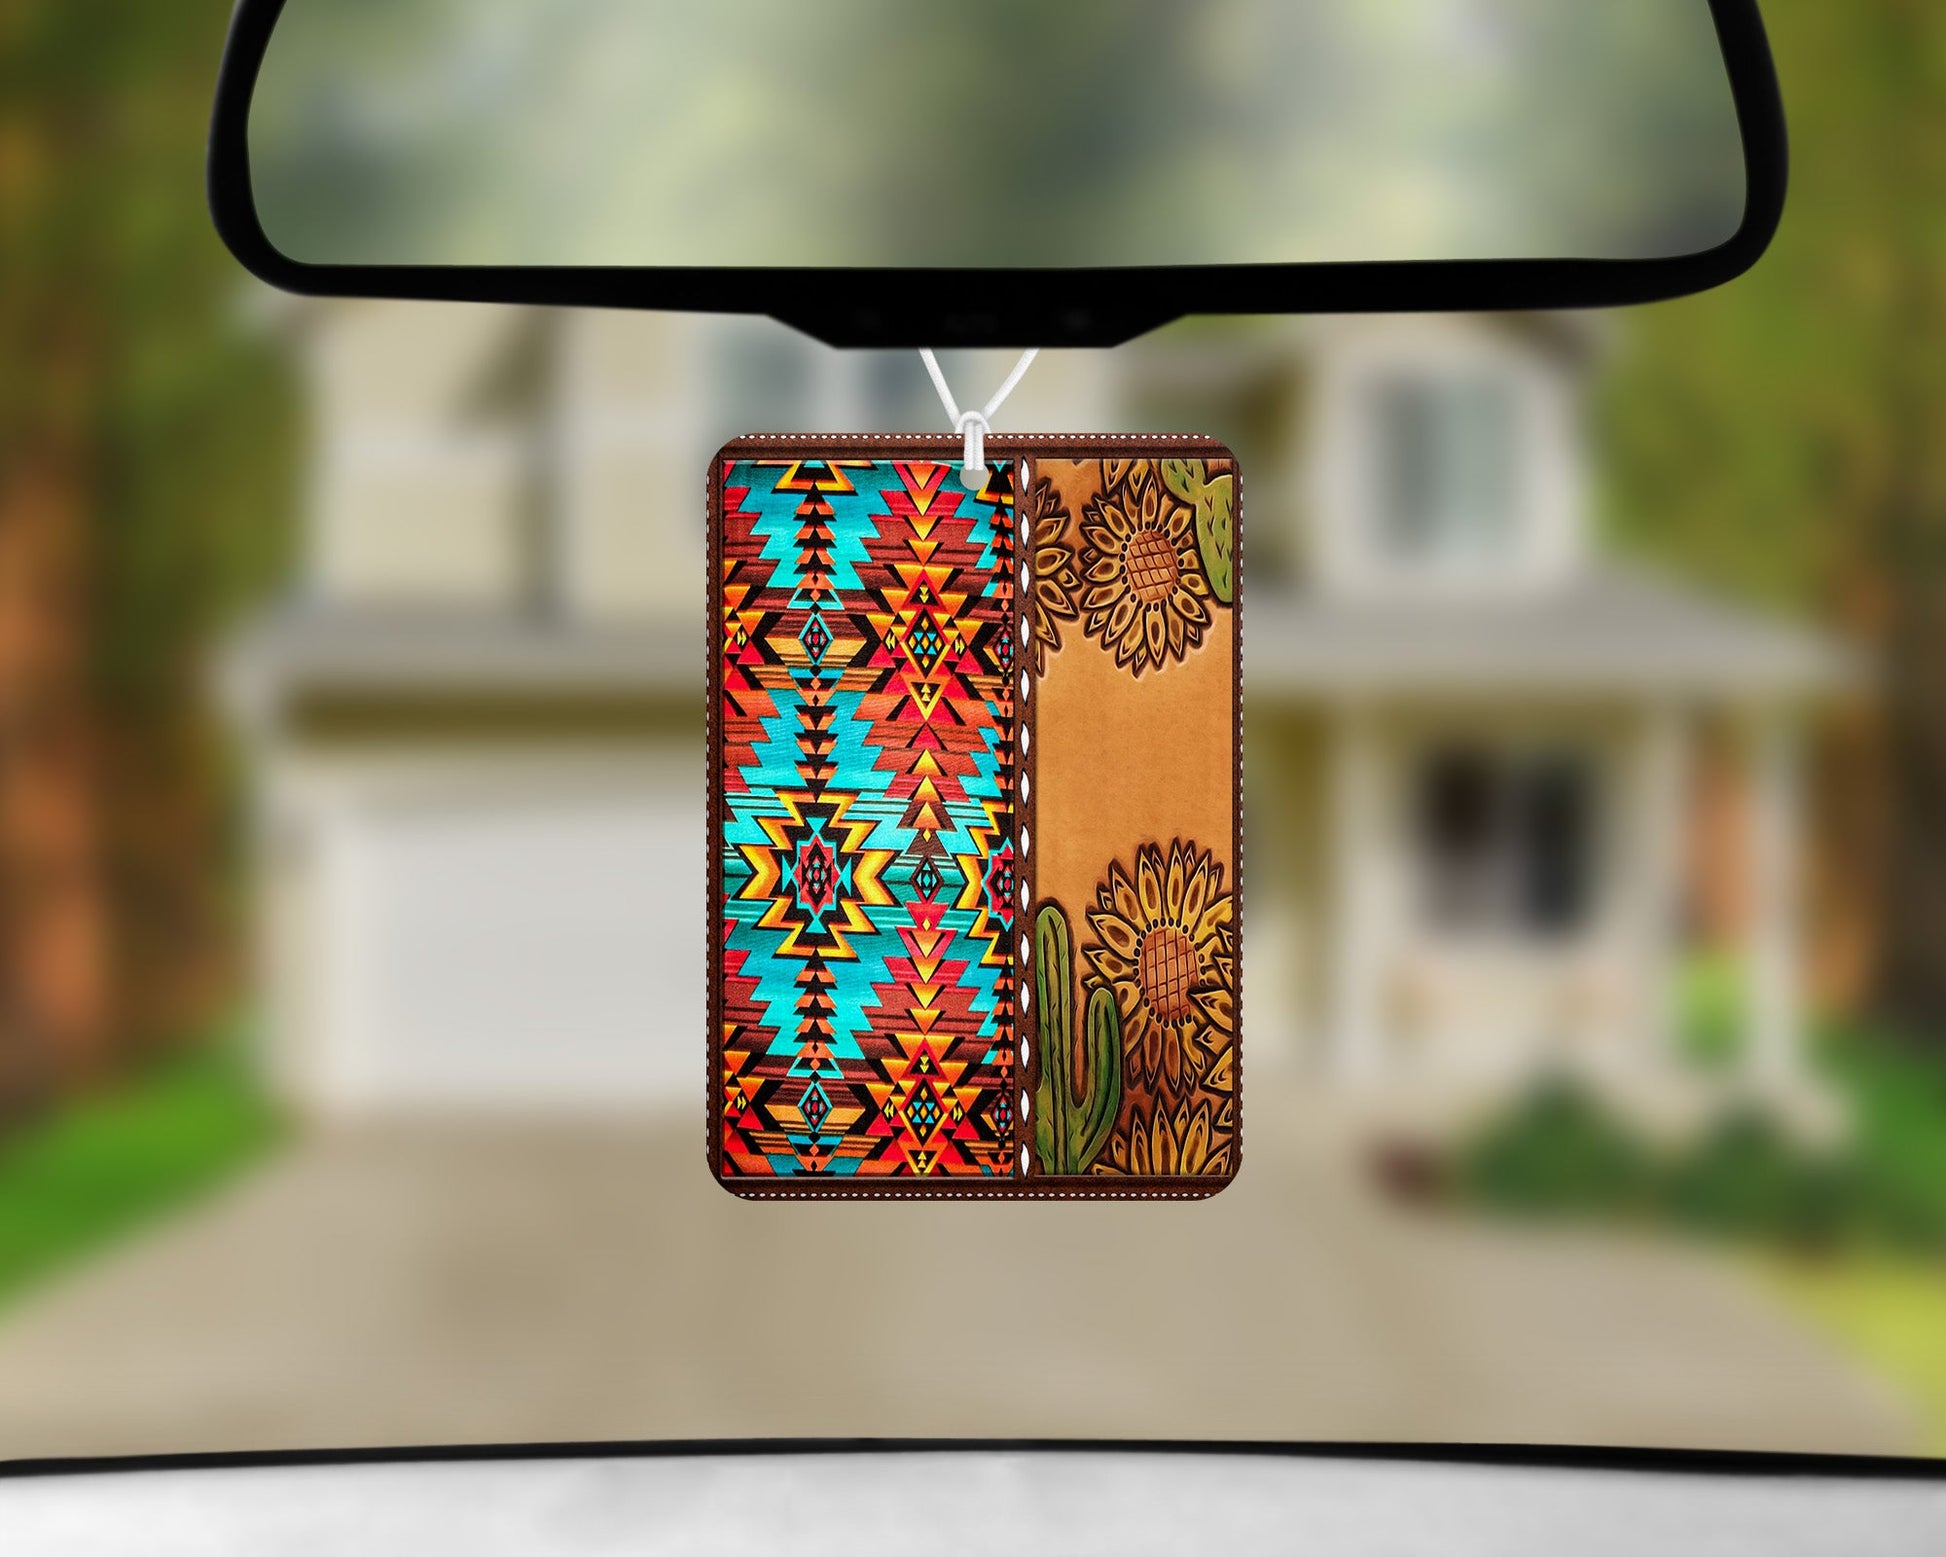 Sunflower Cactus Leather Aztec|Freshie|Includes Scent Bottle - Vehicle Air Freshener